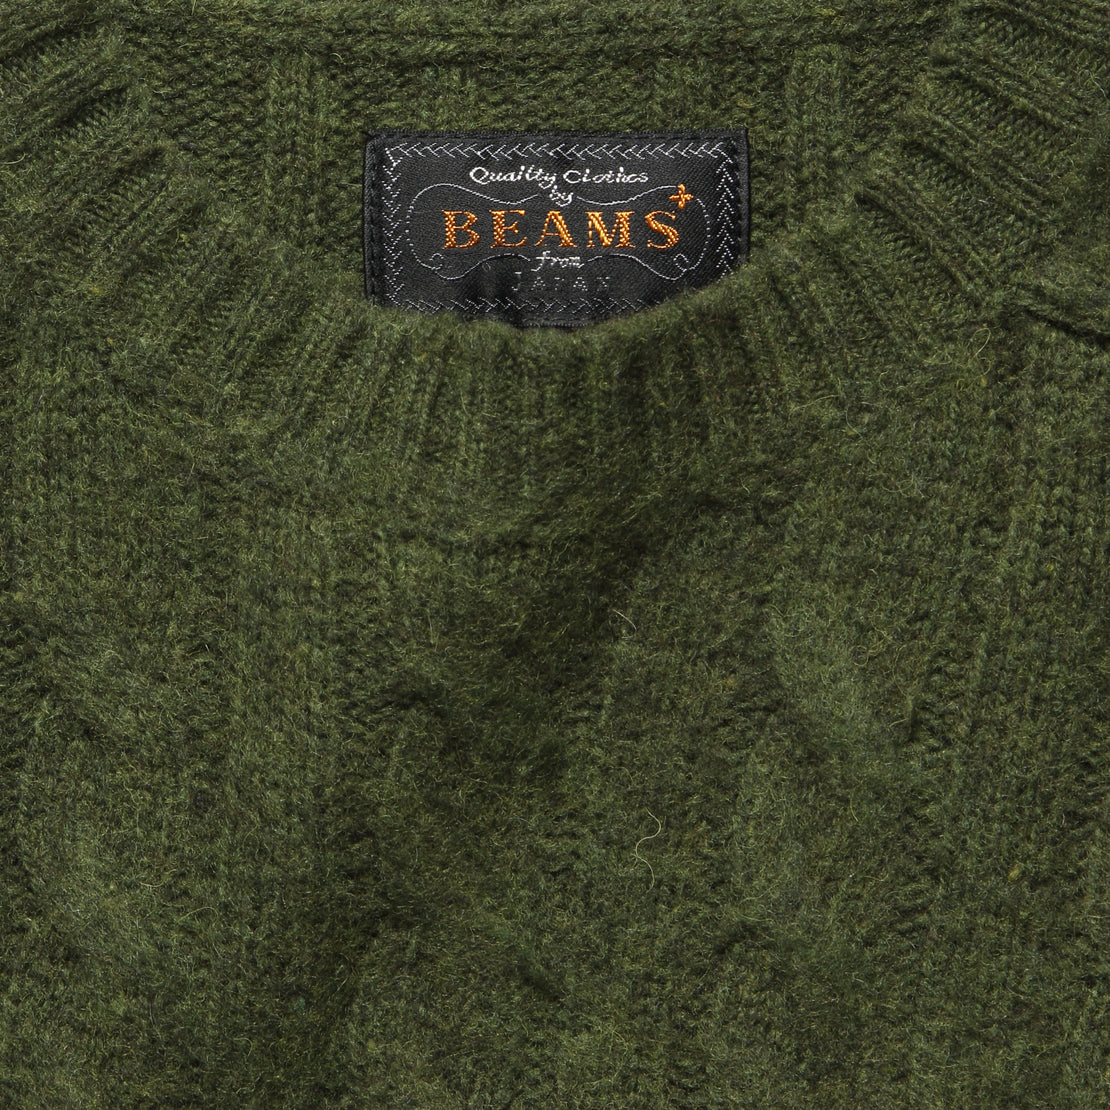 Shaggy Cable Crew Sweater - Olive - BEAMS+ - STAG Provisions - Tops - Sweater